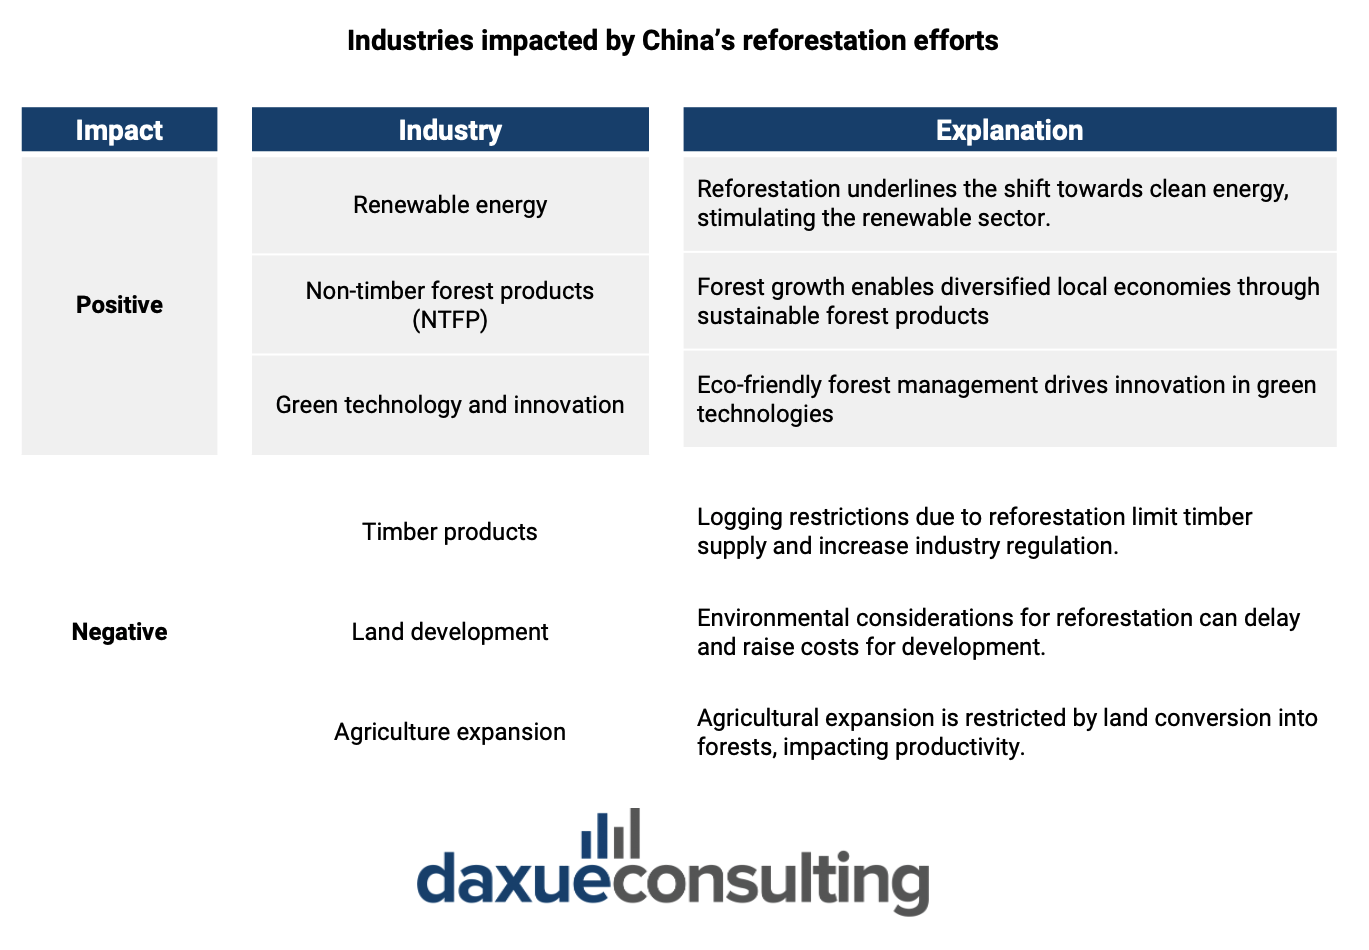 Industries impacted by China’s reforestation efforts